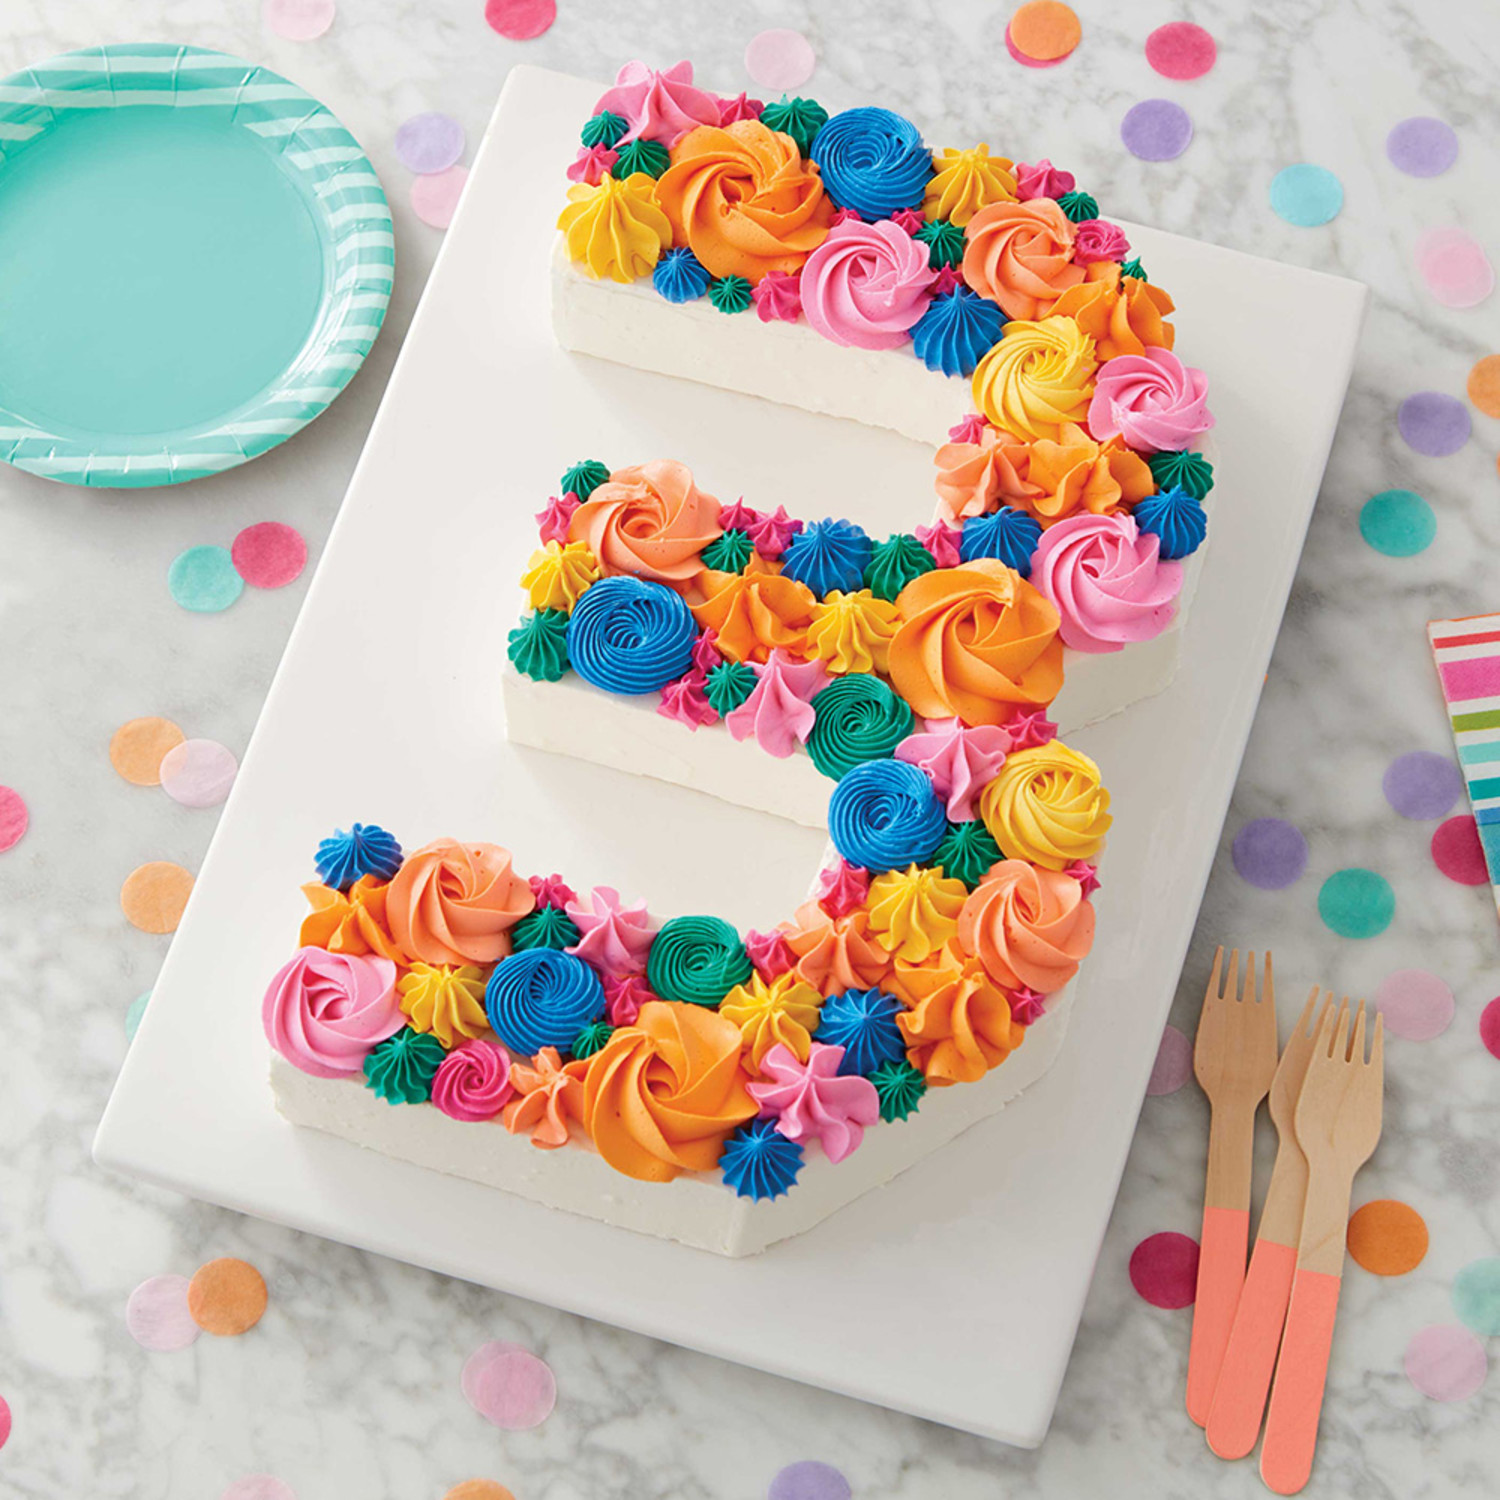 8 Best number one cake ideas | number one cake, first birthday cakes, 1st  birthday cake